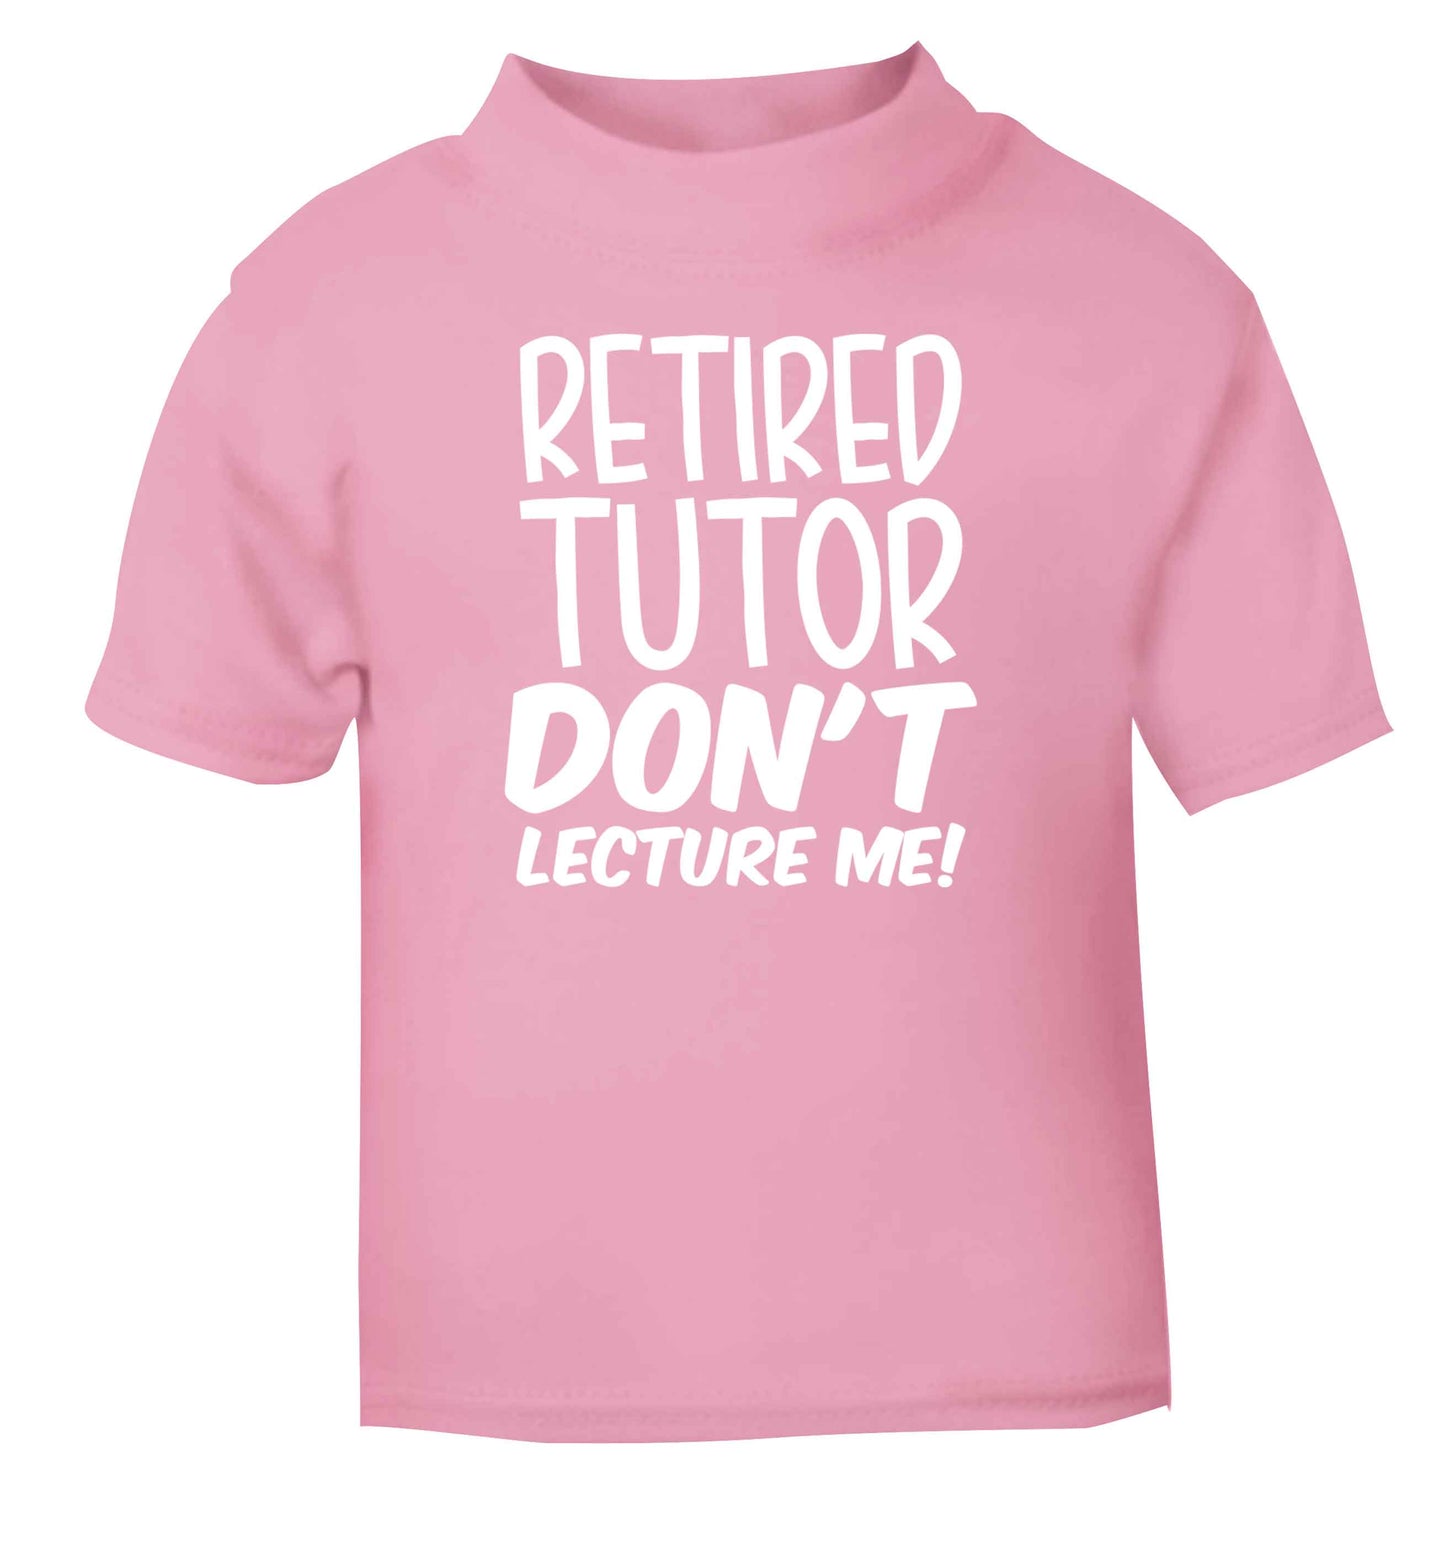 Retired tutor don't lecture me! light pink Baby Toddler Tshirt 2 Years